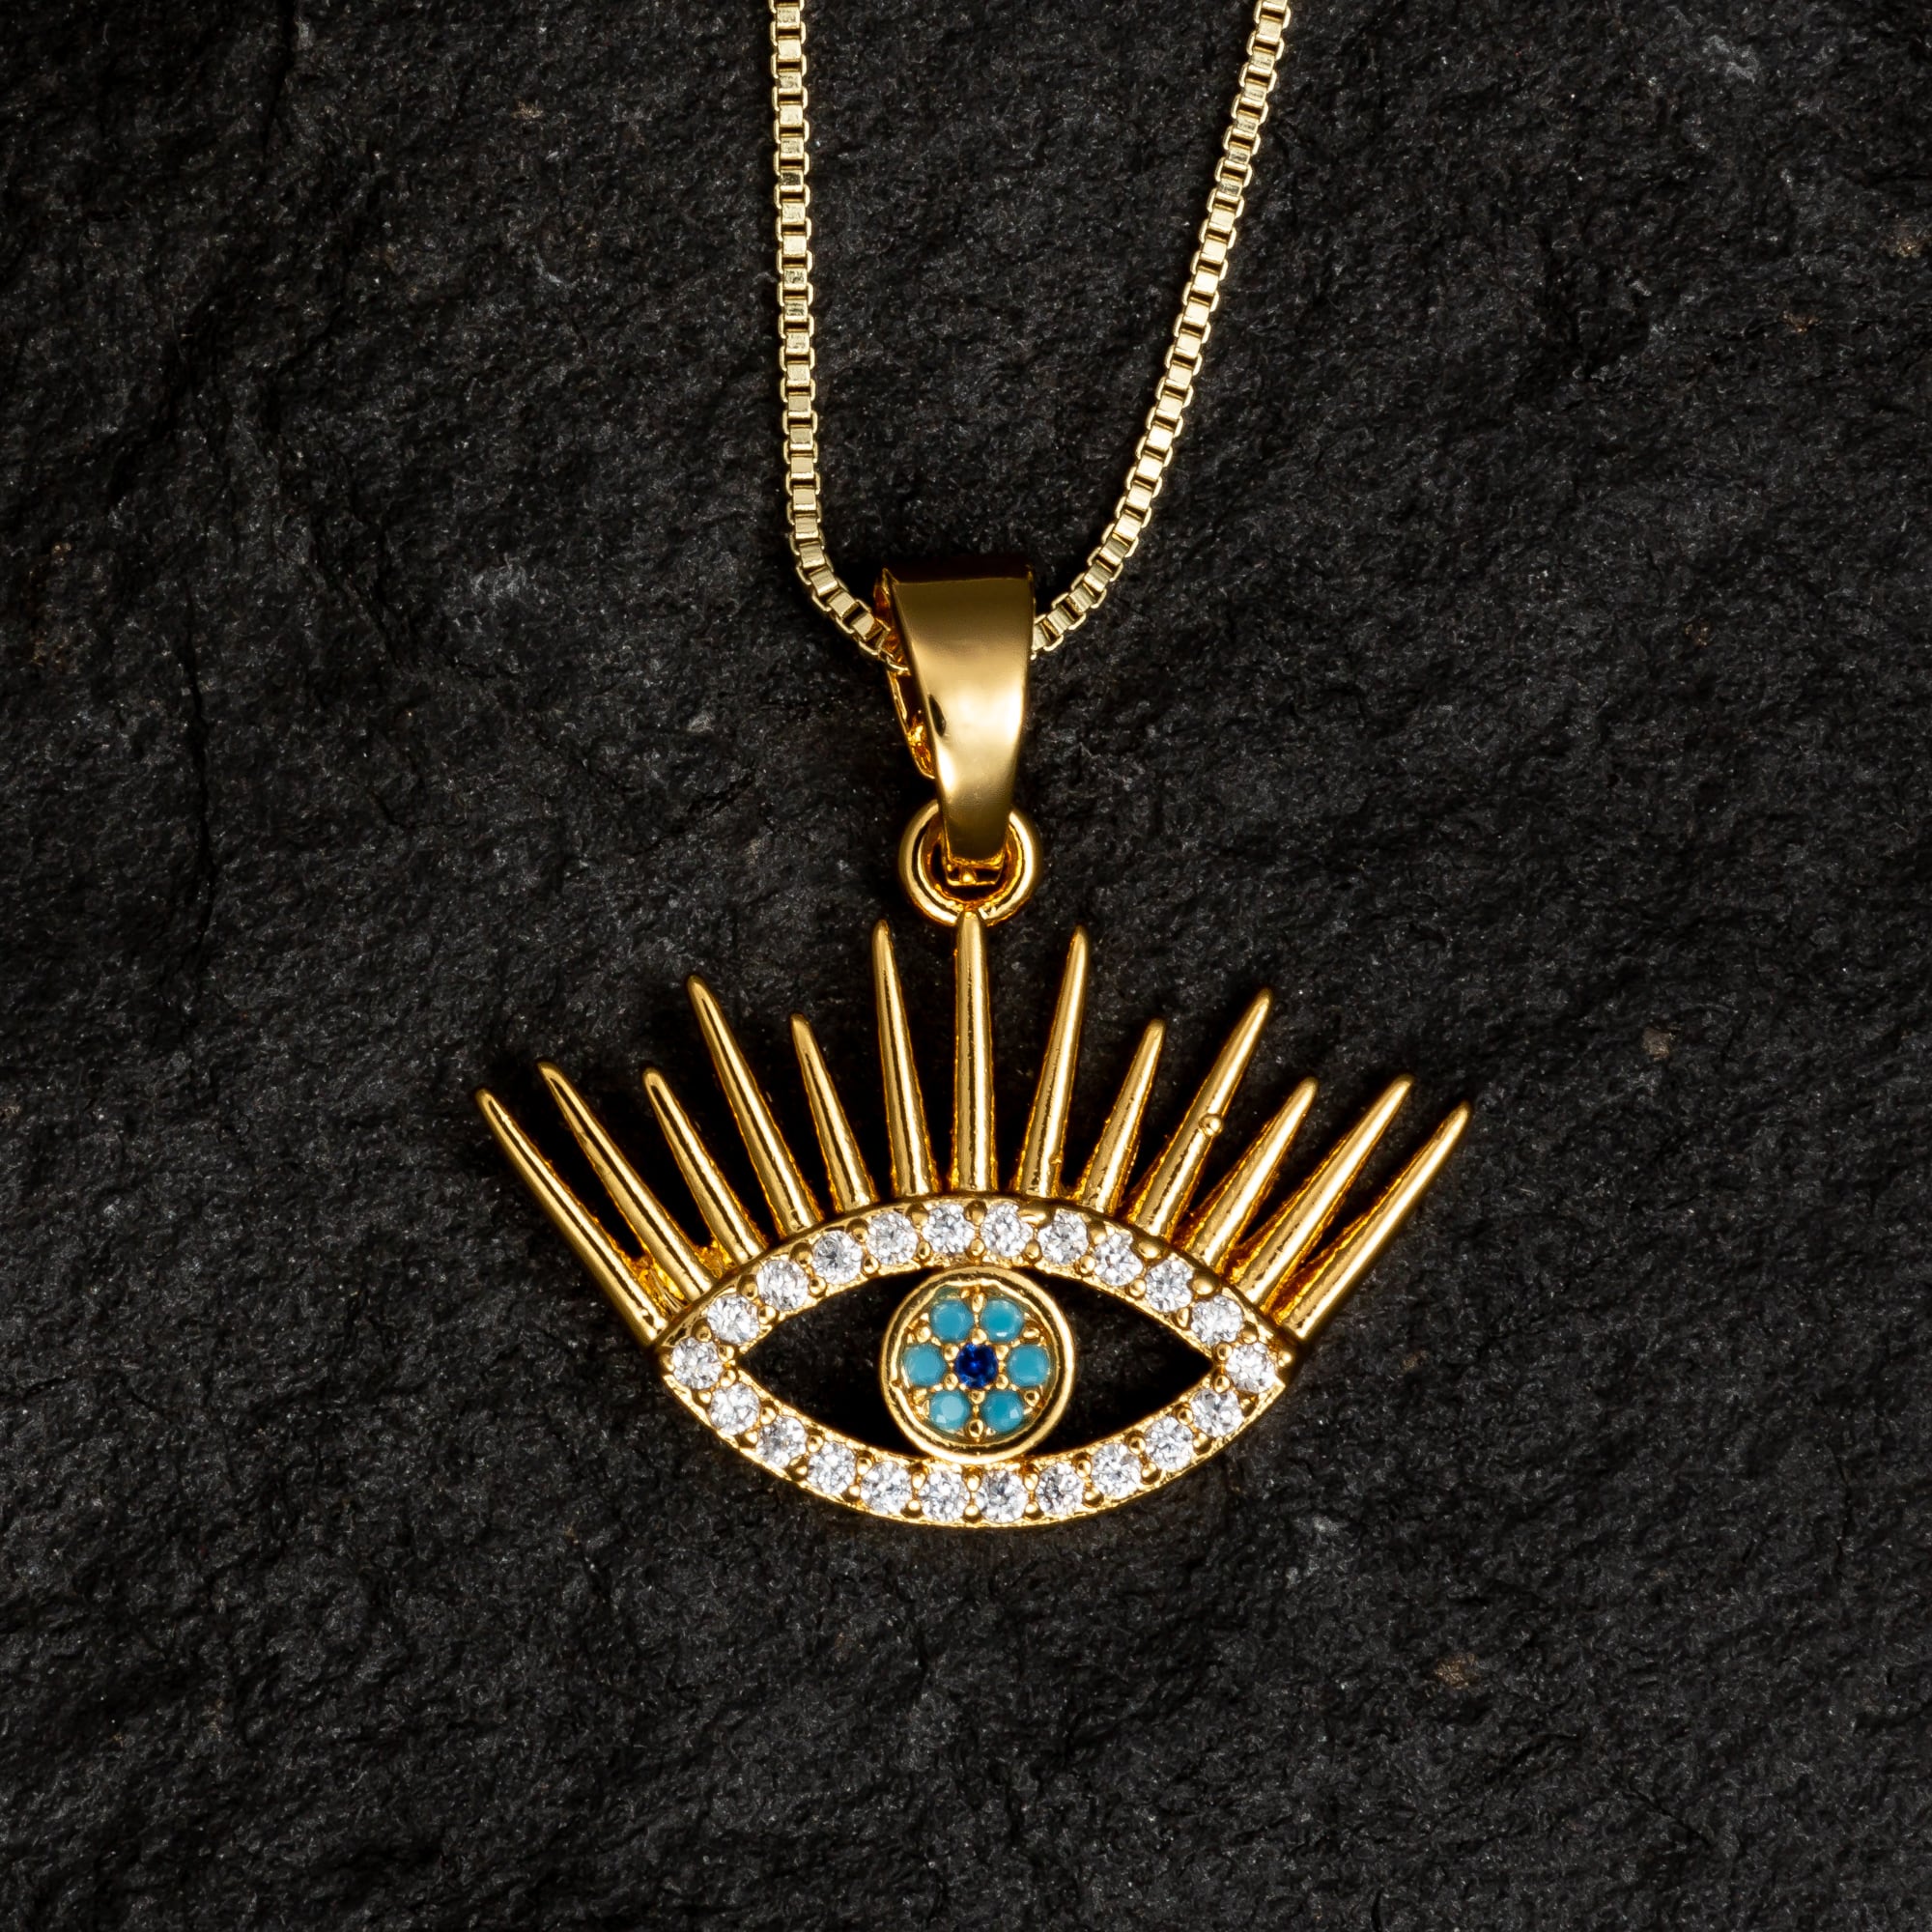 Sun Rays Evil Eye Necklace with Blue Gemstones - Necklaces